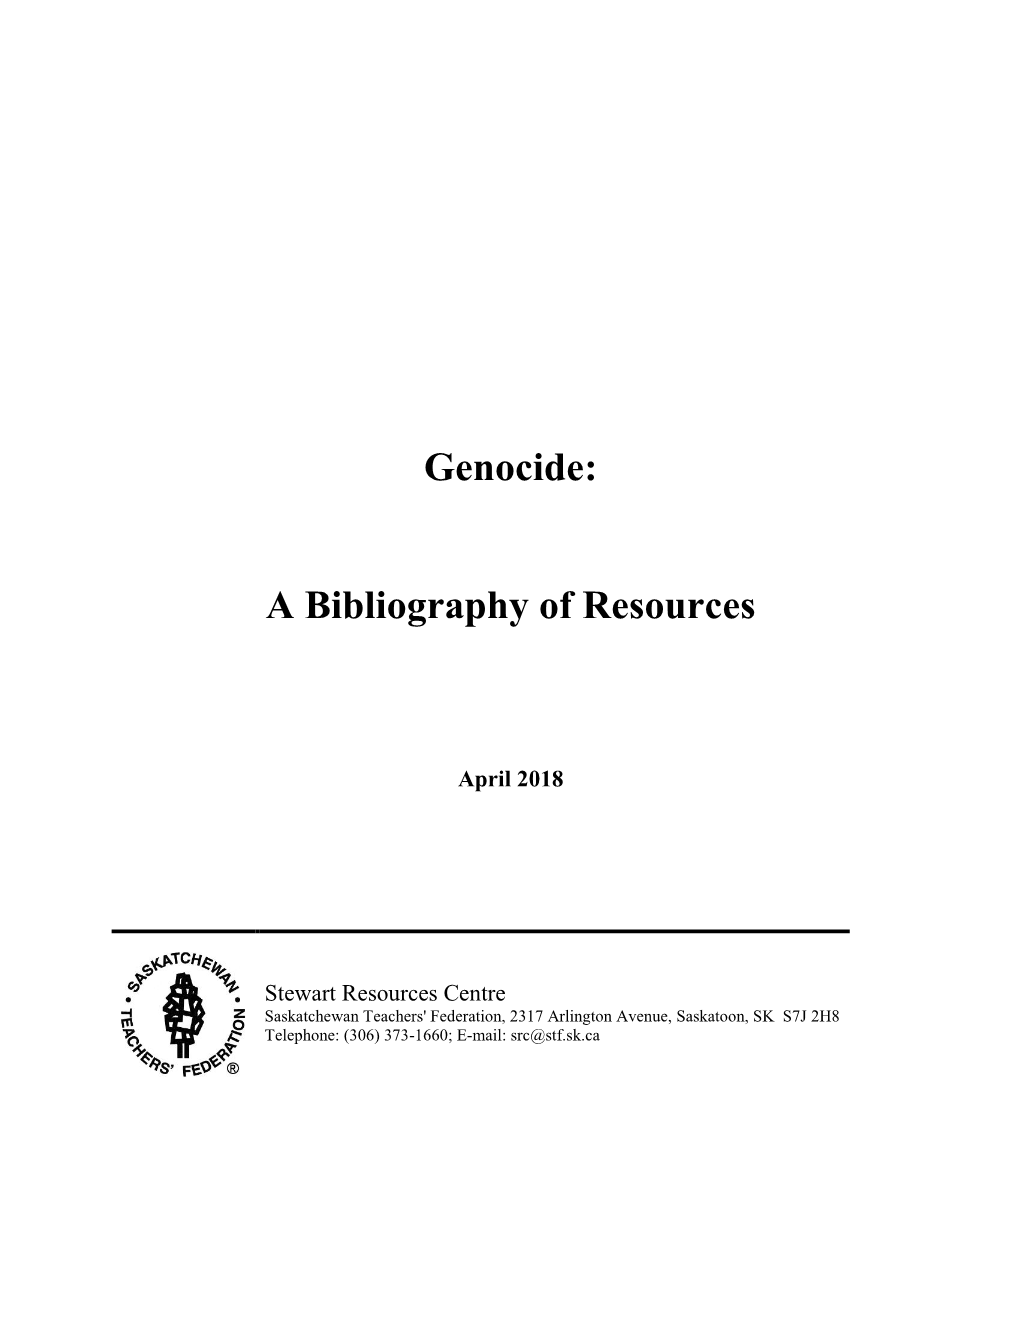 Genocide: a Bibliography of Resources